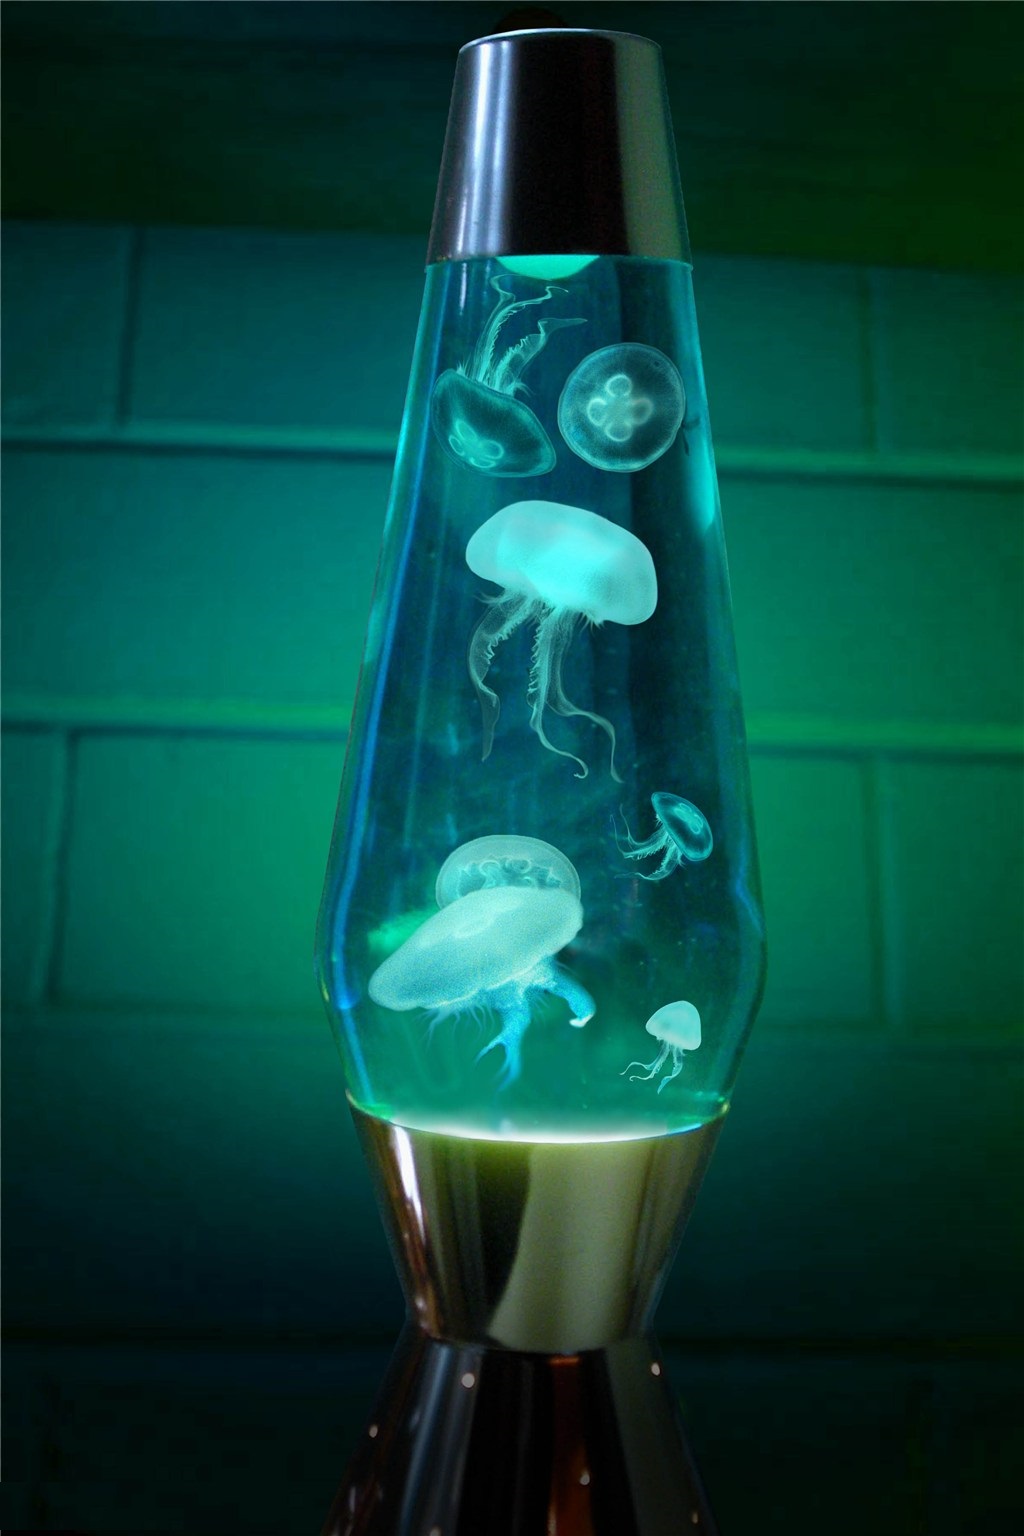 Jellyfish lava lamp - 10 favorite bed room items of all times - Warisan